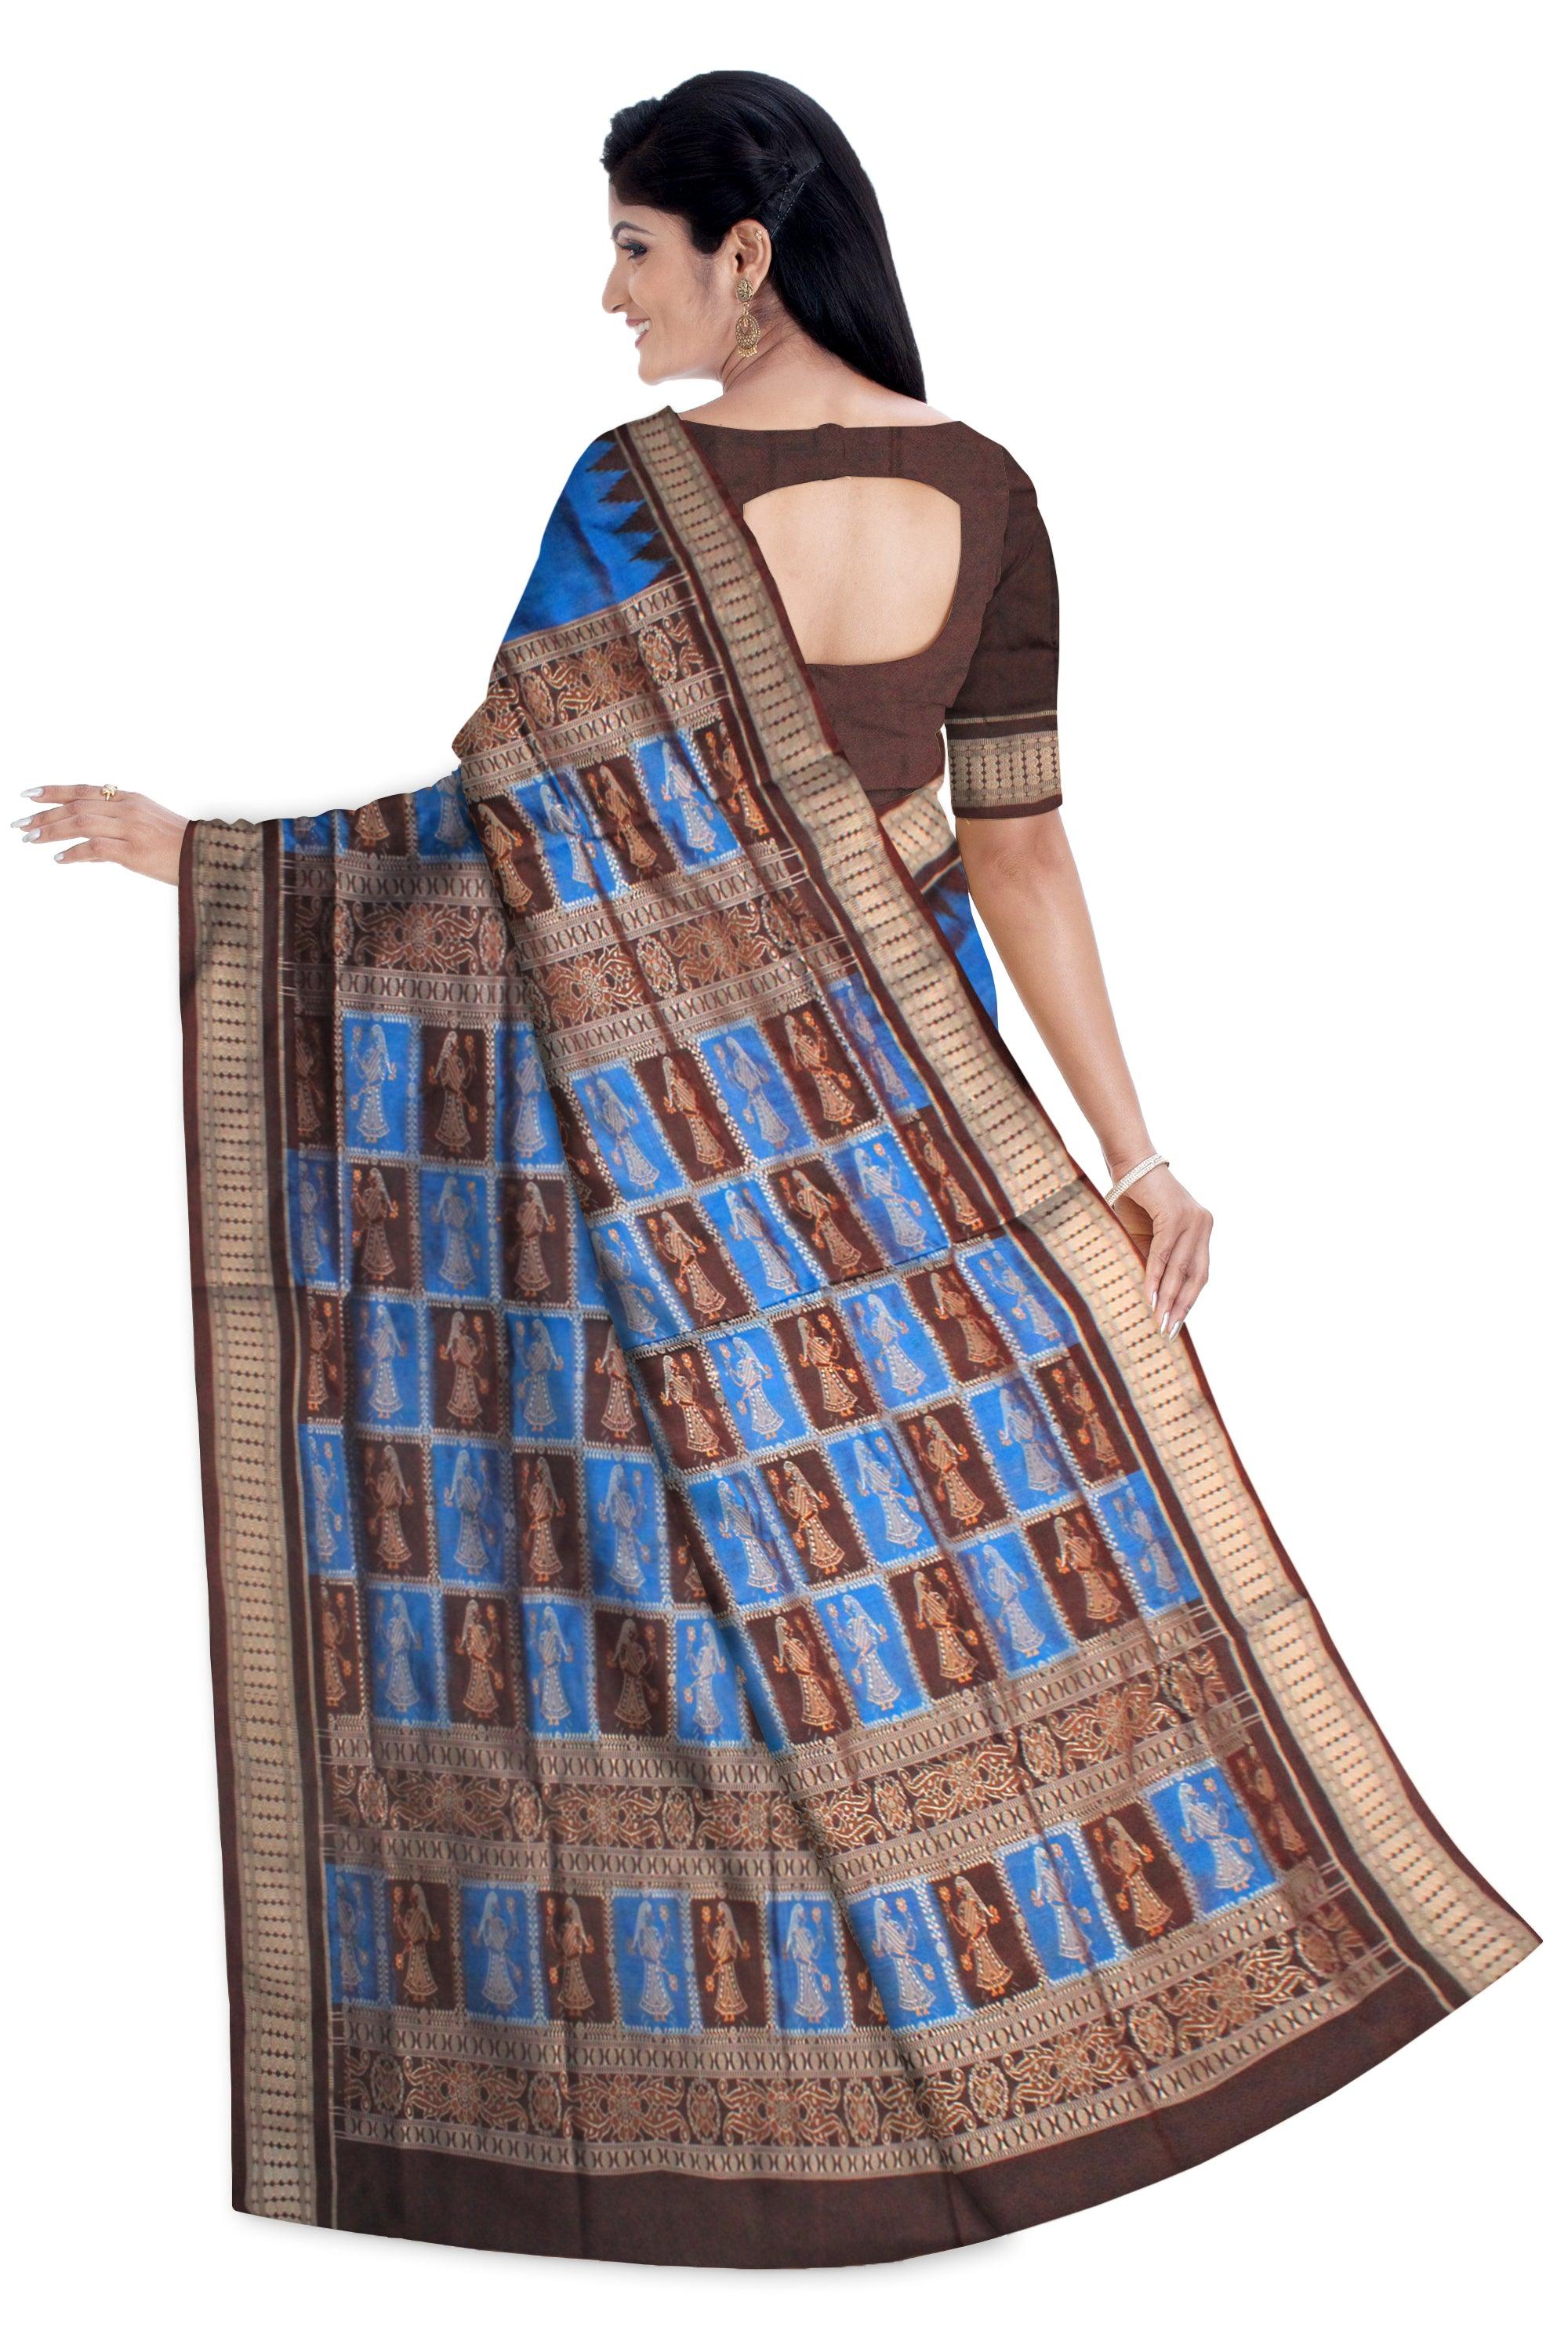 SONEPURI PATA SAREE IN BLUE AND COFFEE COLOR WITH BLOUSE. - Koshali Arts & Crafts Enterprise